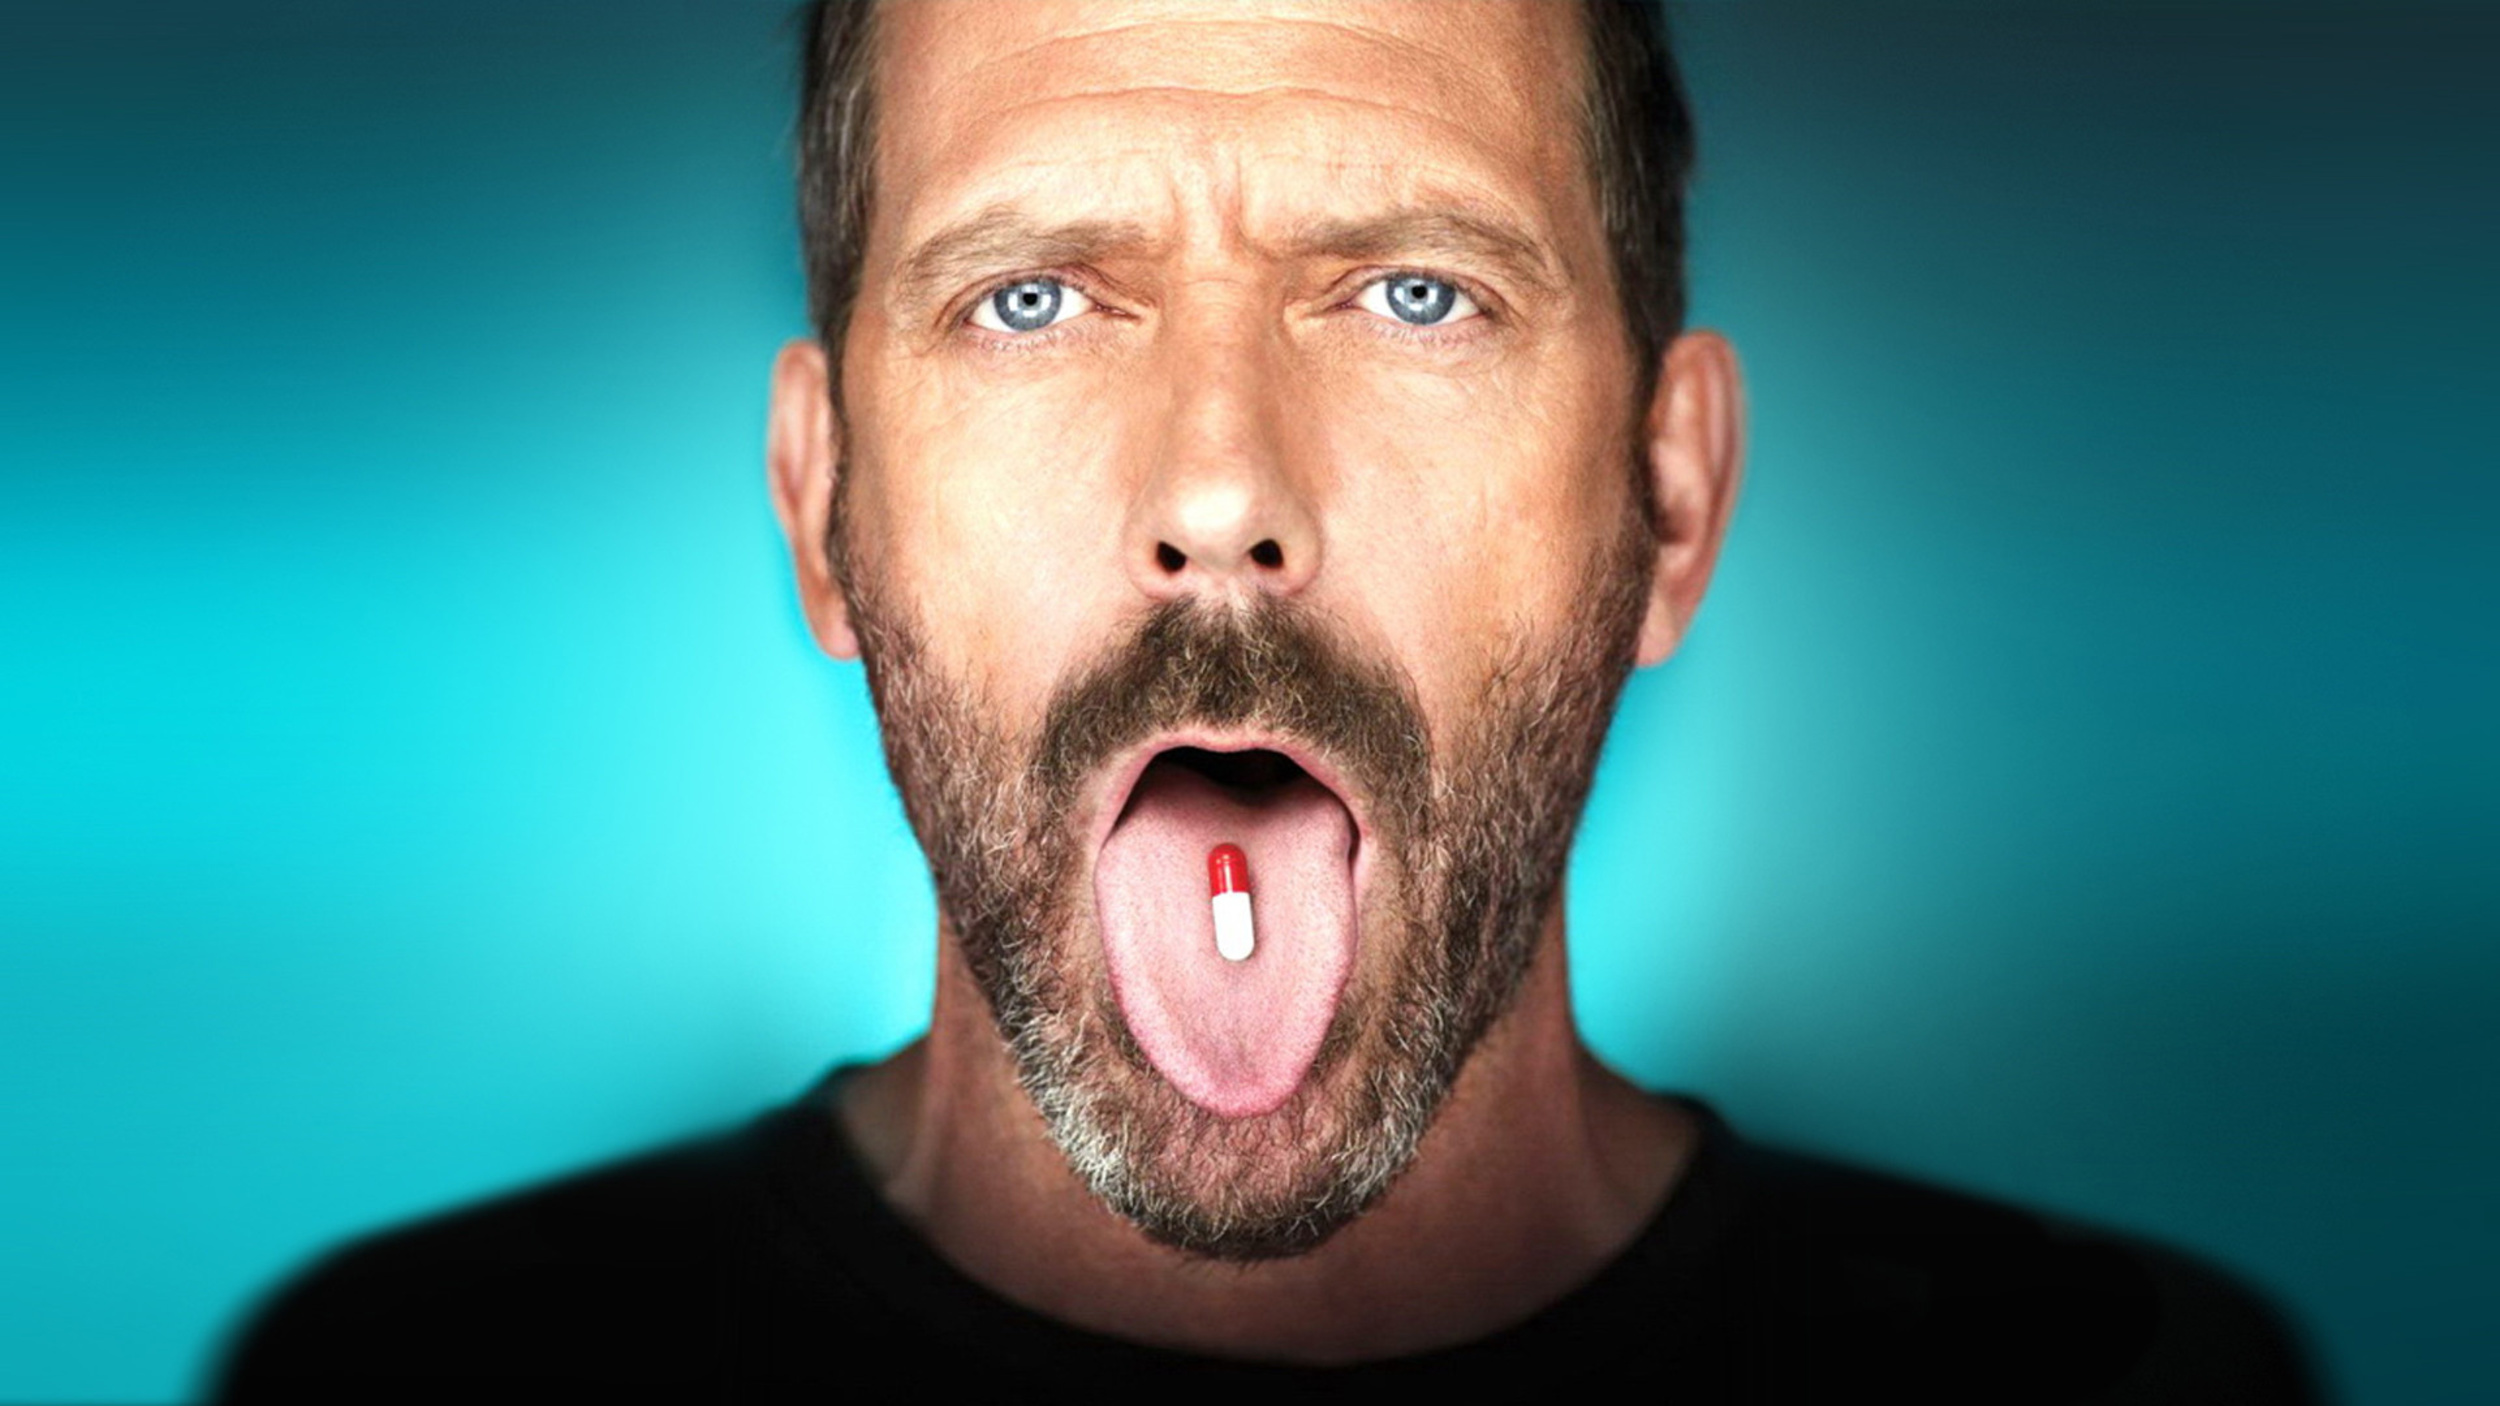 <p>You might not remember this, but "House" ended with Dr. Gregory House faking his own death. Really think about this show — think about the type of show it was, its genre, everything — and try to understand how there was any world in which “House fakes his death” was a natural end to anything. At least this episode had some good cameos, which is really all you can give it credit for.</p><p>You may also like: <a href='https://www.yardbarker.com/entertainment/articles/the_20_best_creature_features_012424/s1__39455343'>The 20 best creature features</a></p>